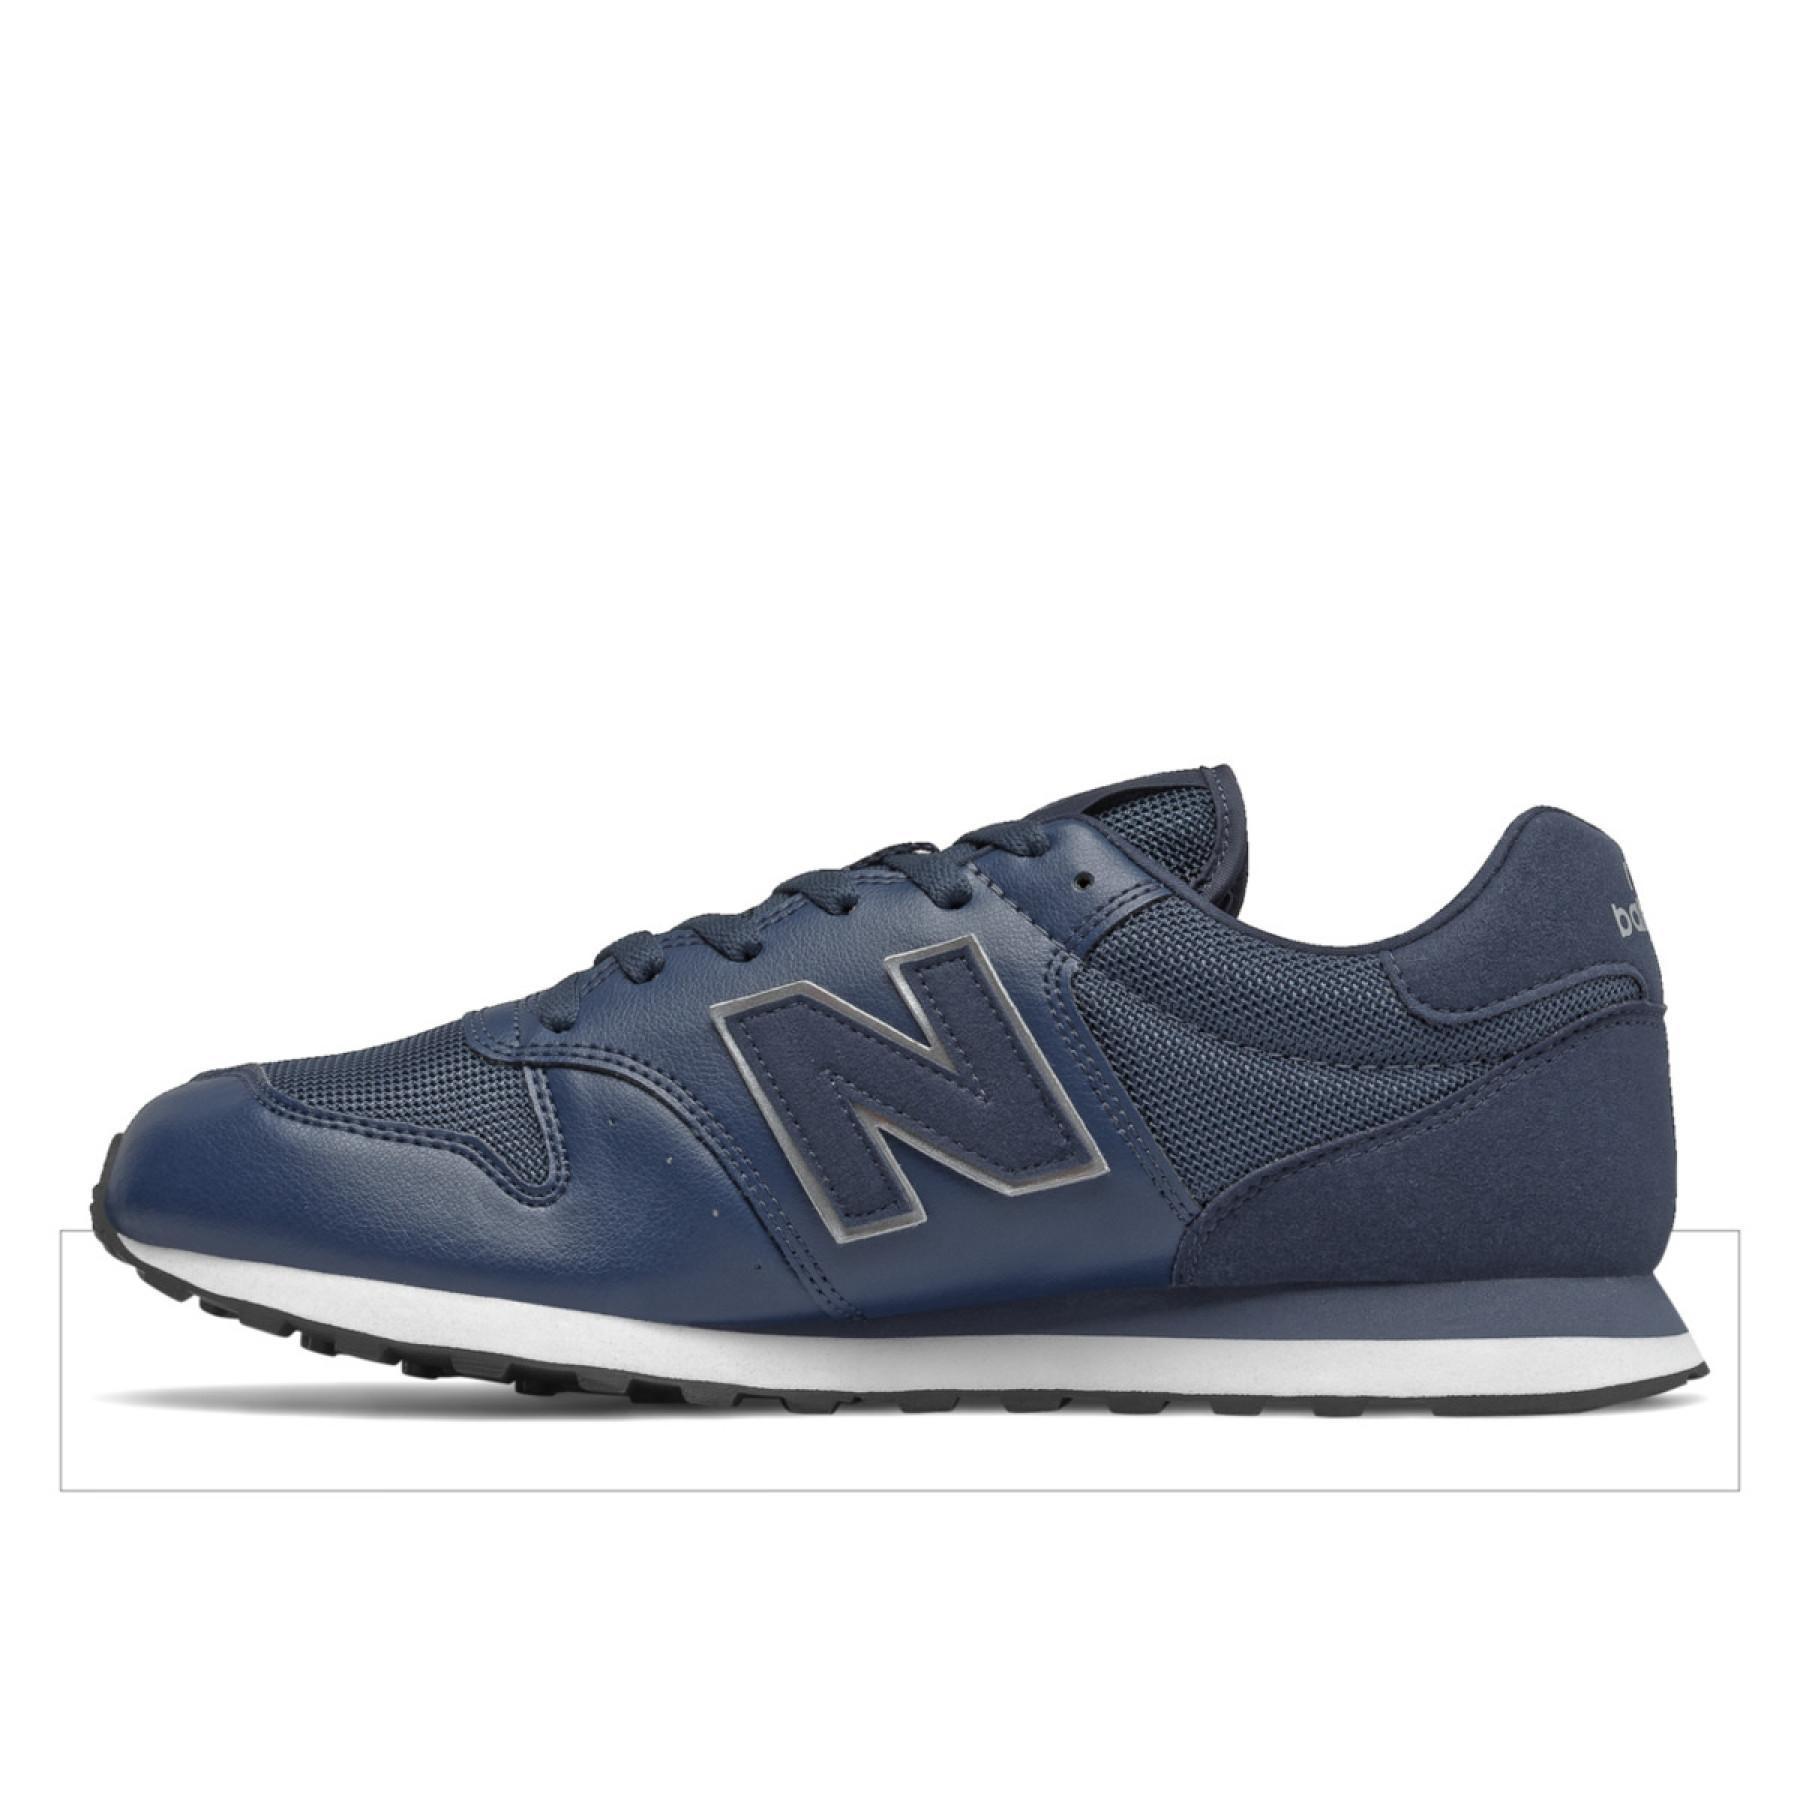 Formadores New Balance 500 classic